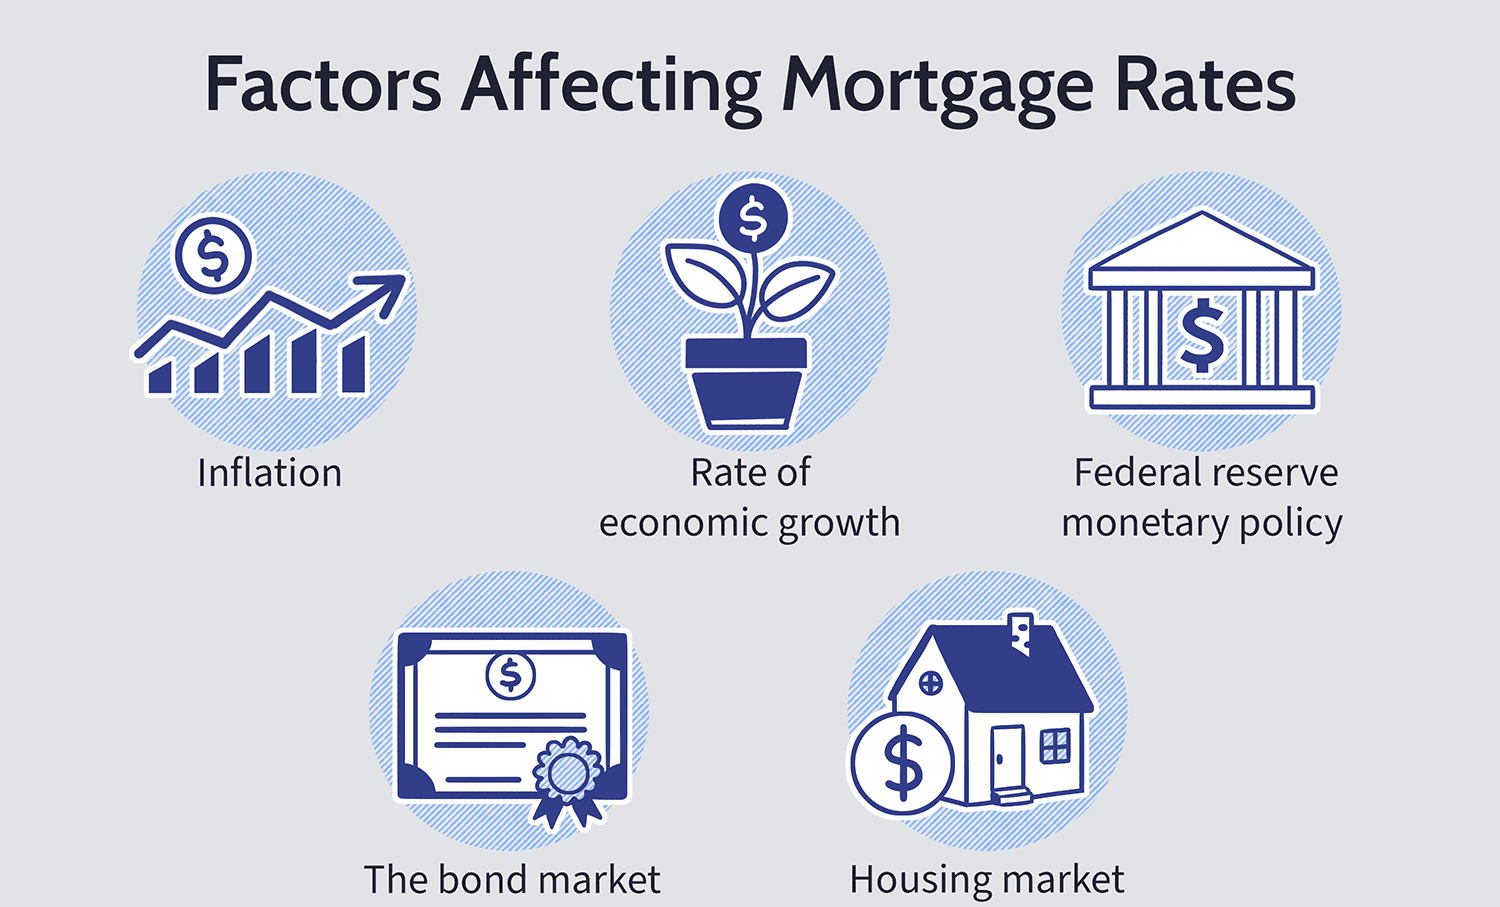 What is considered a high mortgage rate?